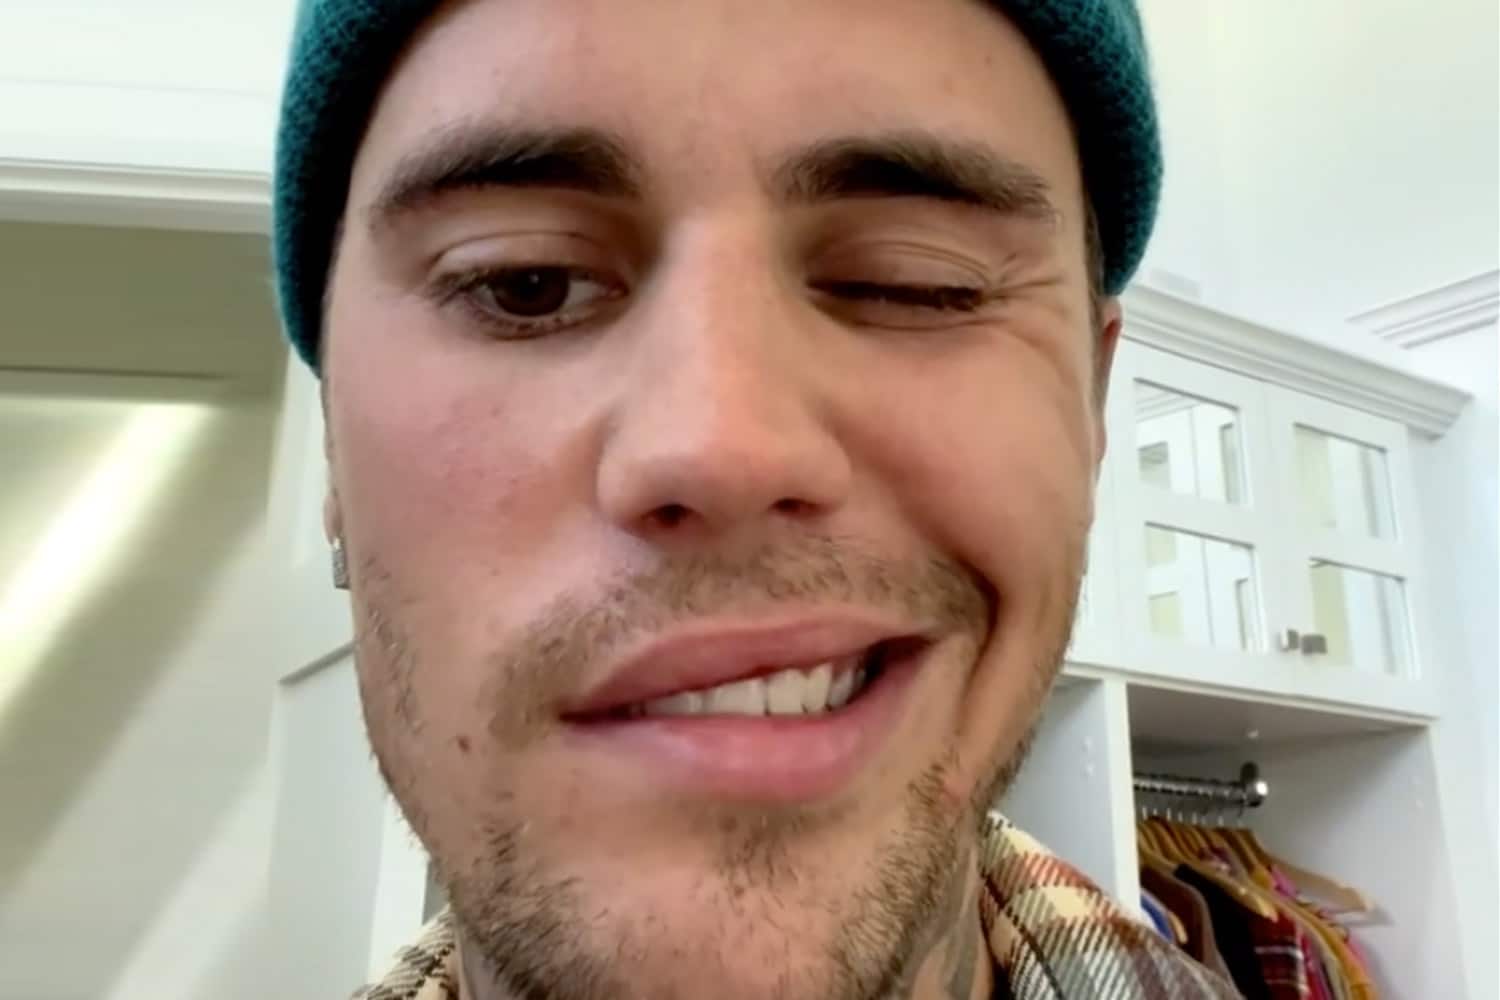 VIDEO: Justin Bieber reveals he is suffering from facial paralysis